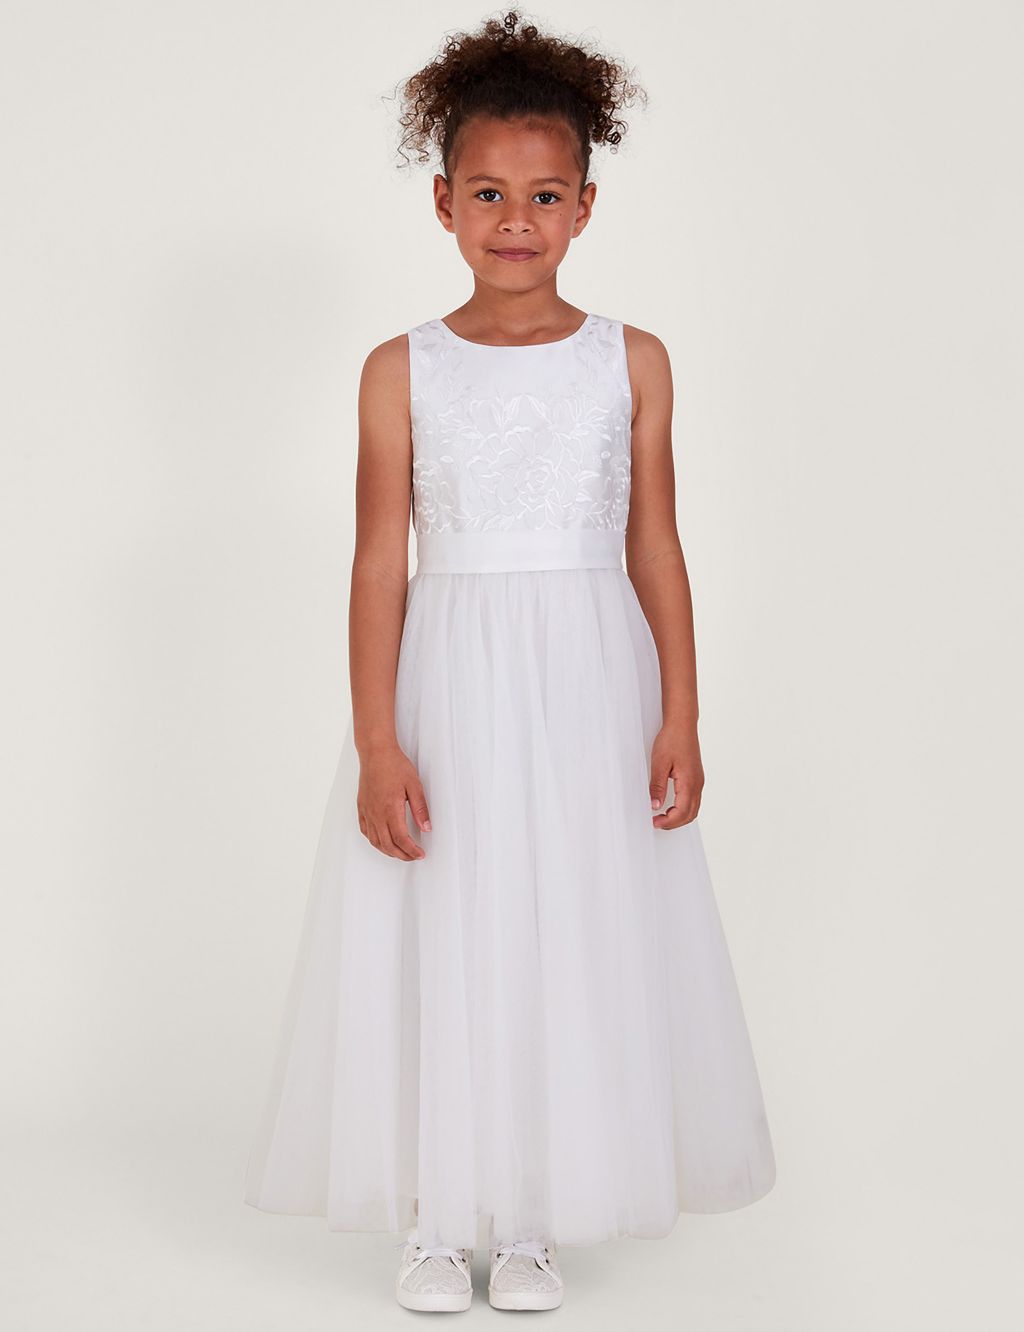 Embroidered Tulle Occasion Dress (3-13 Yrs) image 1